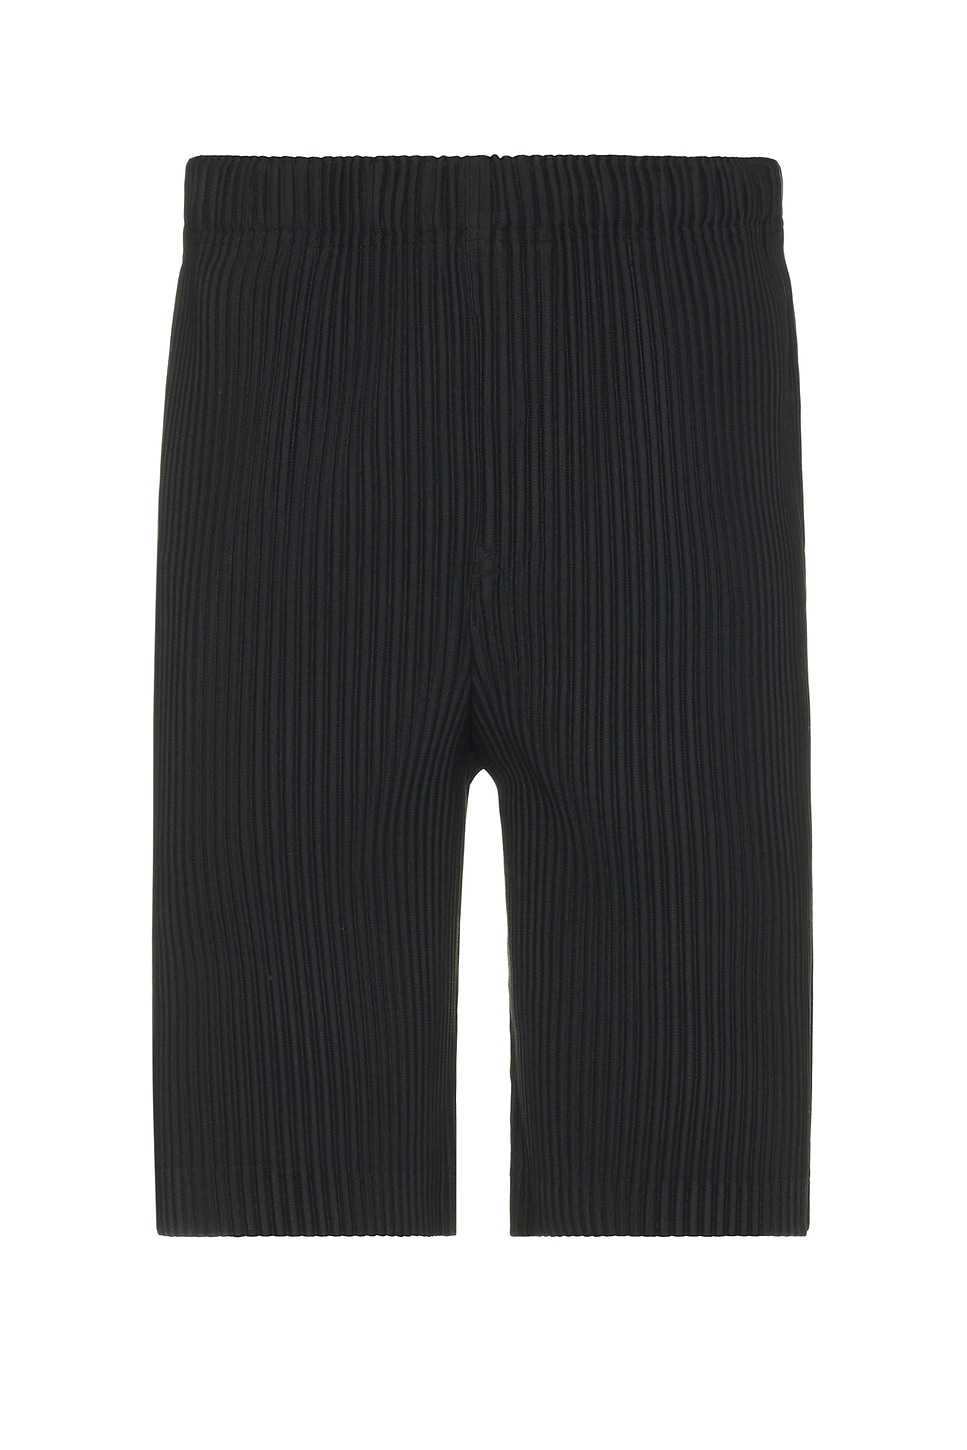 Image 1 of Homme Plisse Issey Miyake Pleated Shorts in Black